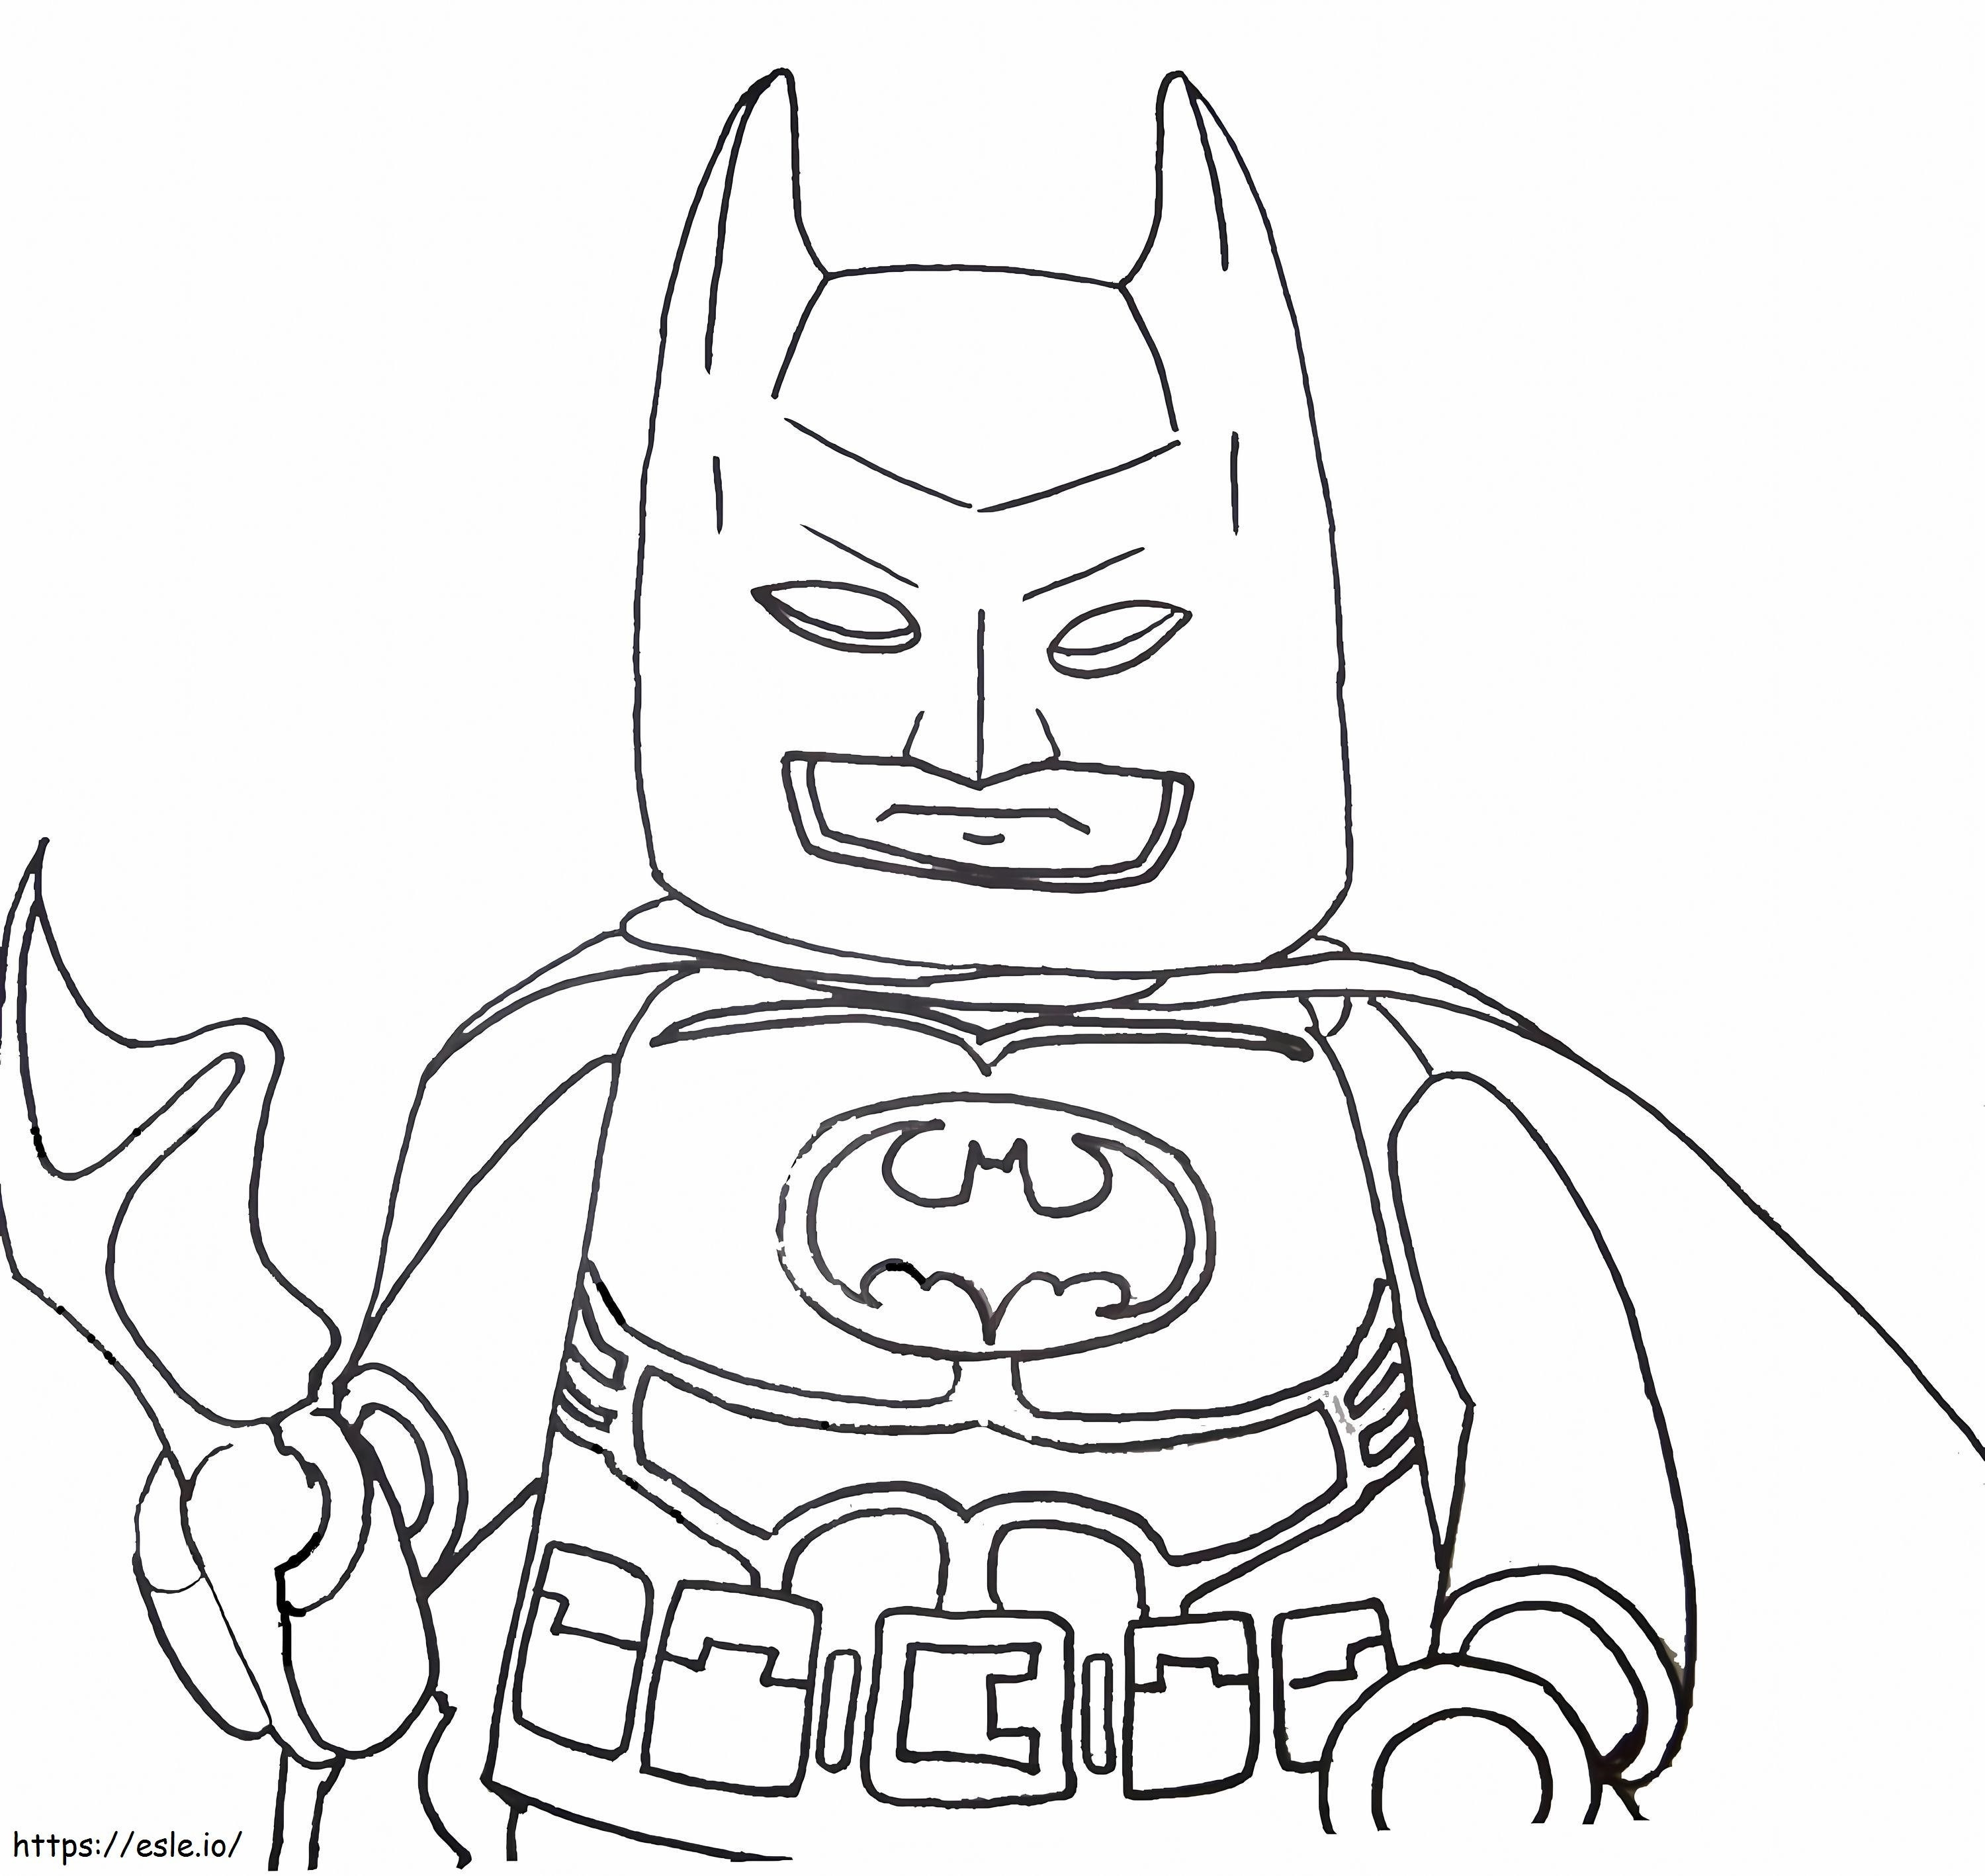 Lego Batman Face Holding Weapon coloring page